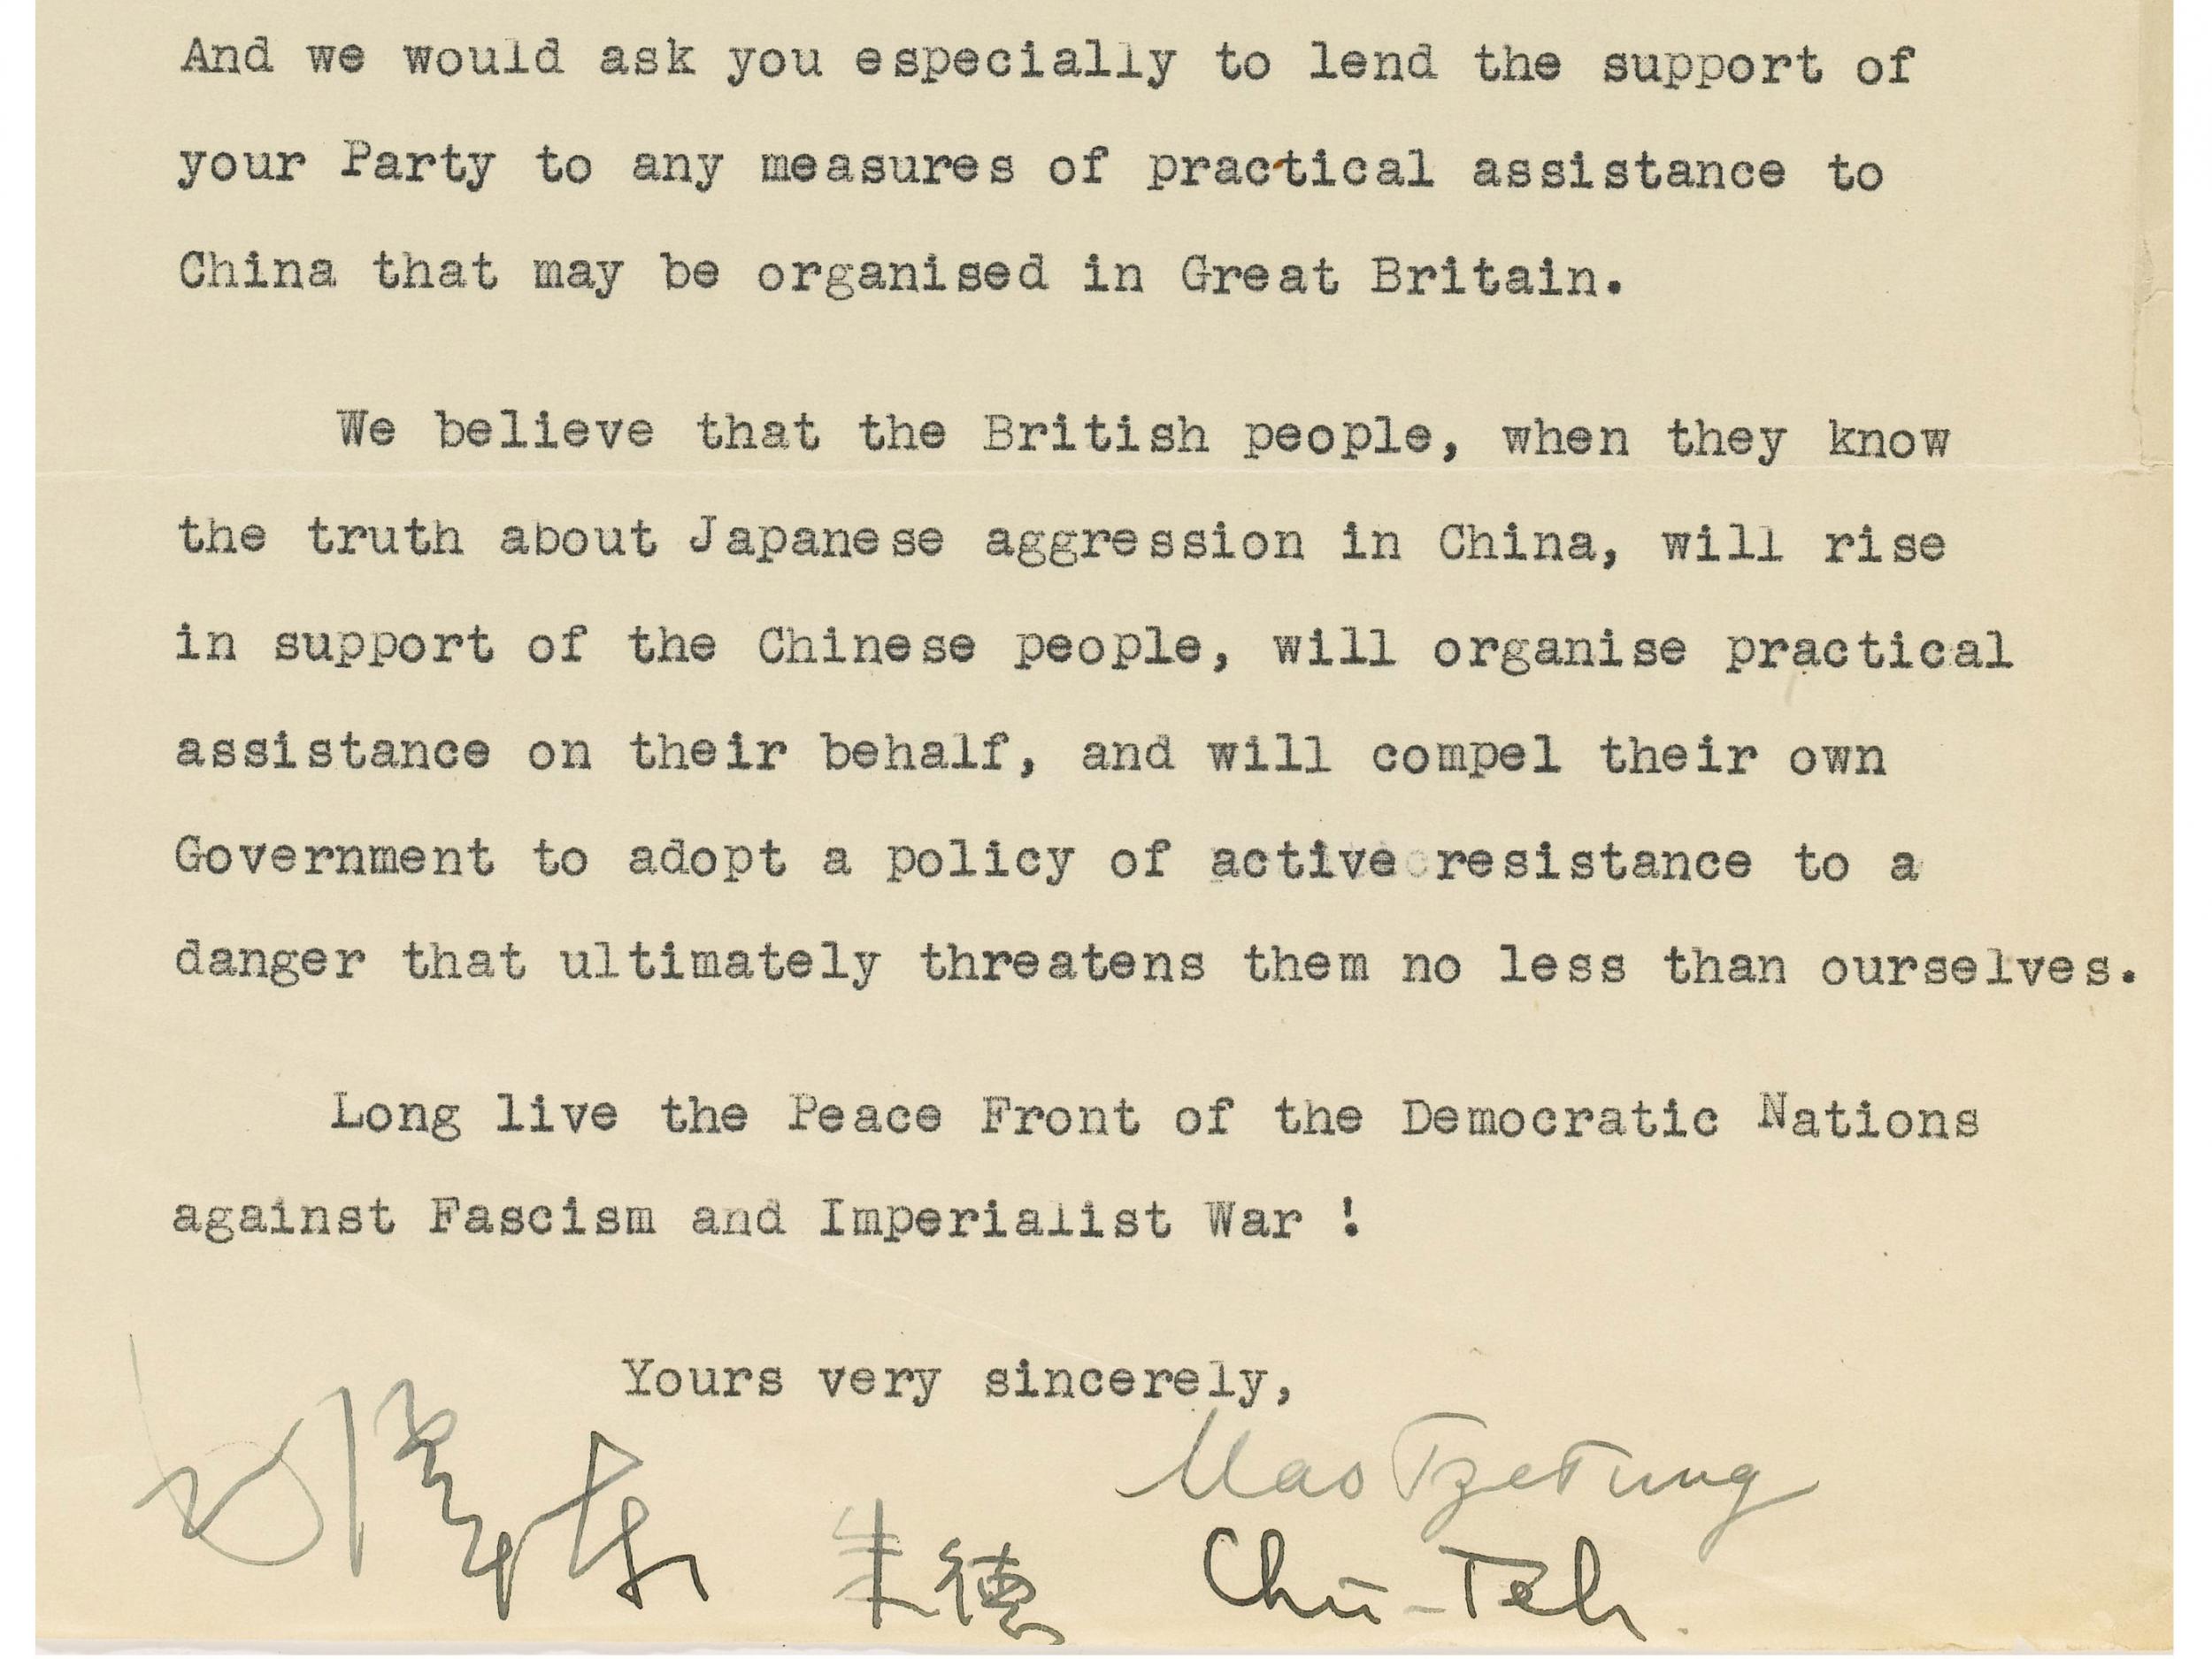 The letter from Mao Zedong to Clement Attlee - showing Mao's signature